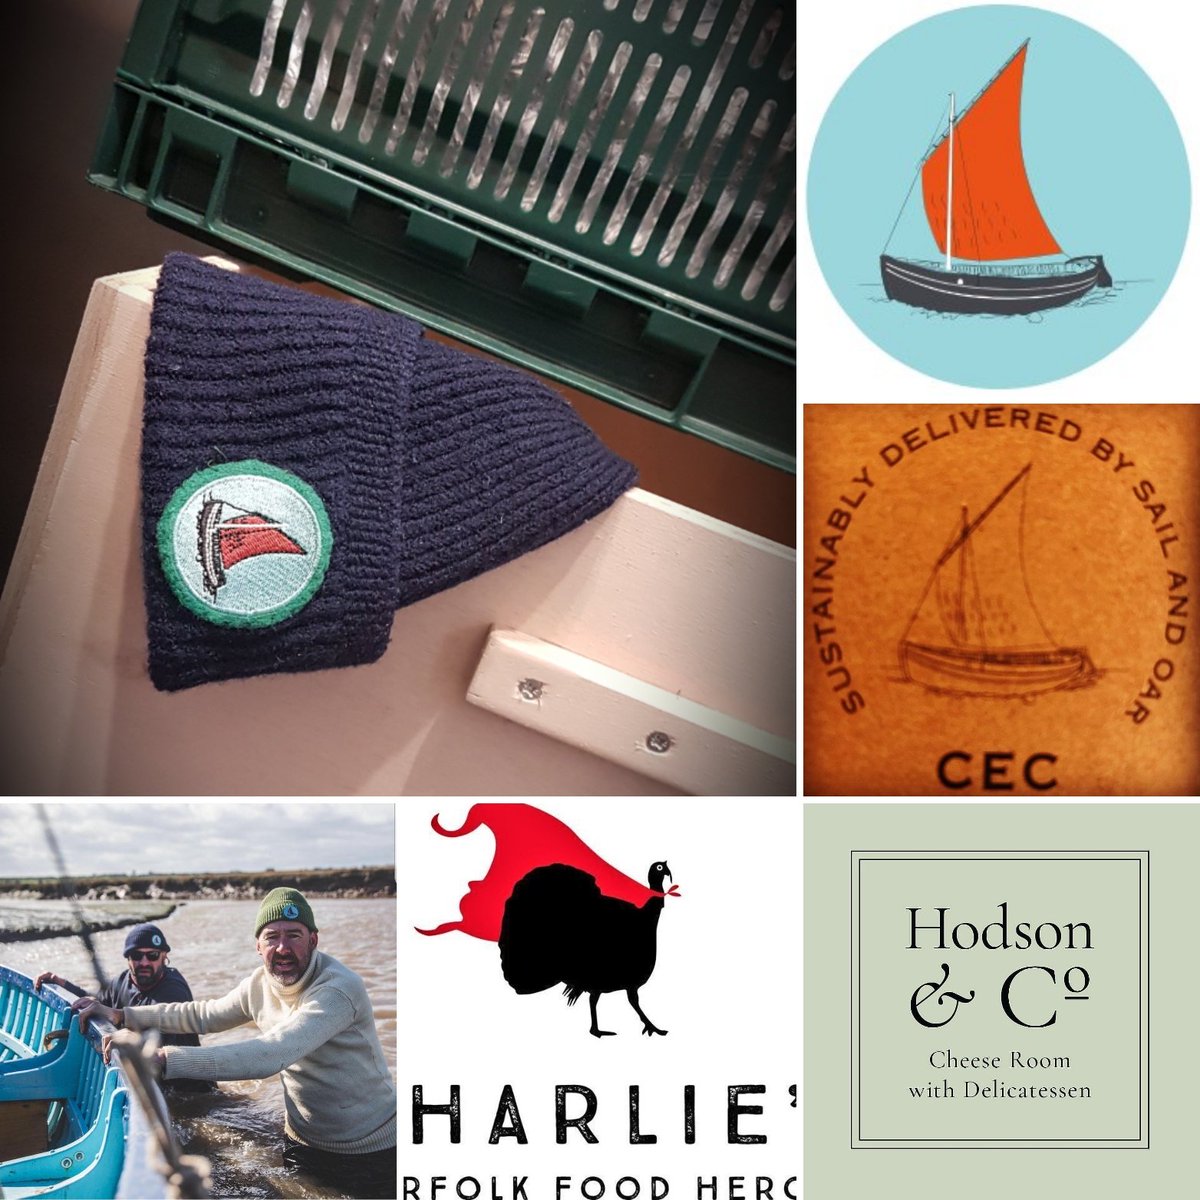 Great new collaboration between @HodsonAndCoDeli & @henrynorfolk701 supported by @charliesheroes using @Chill_Pods versatility. We are so very proud to be supporting Henry & the team at CEC